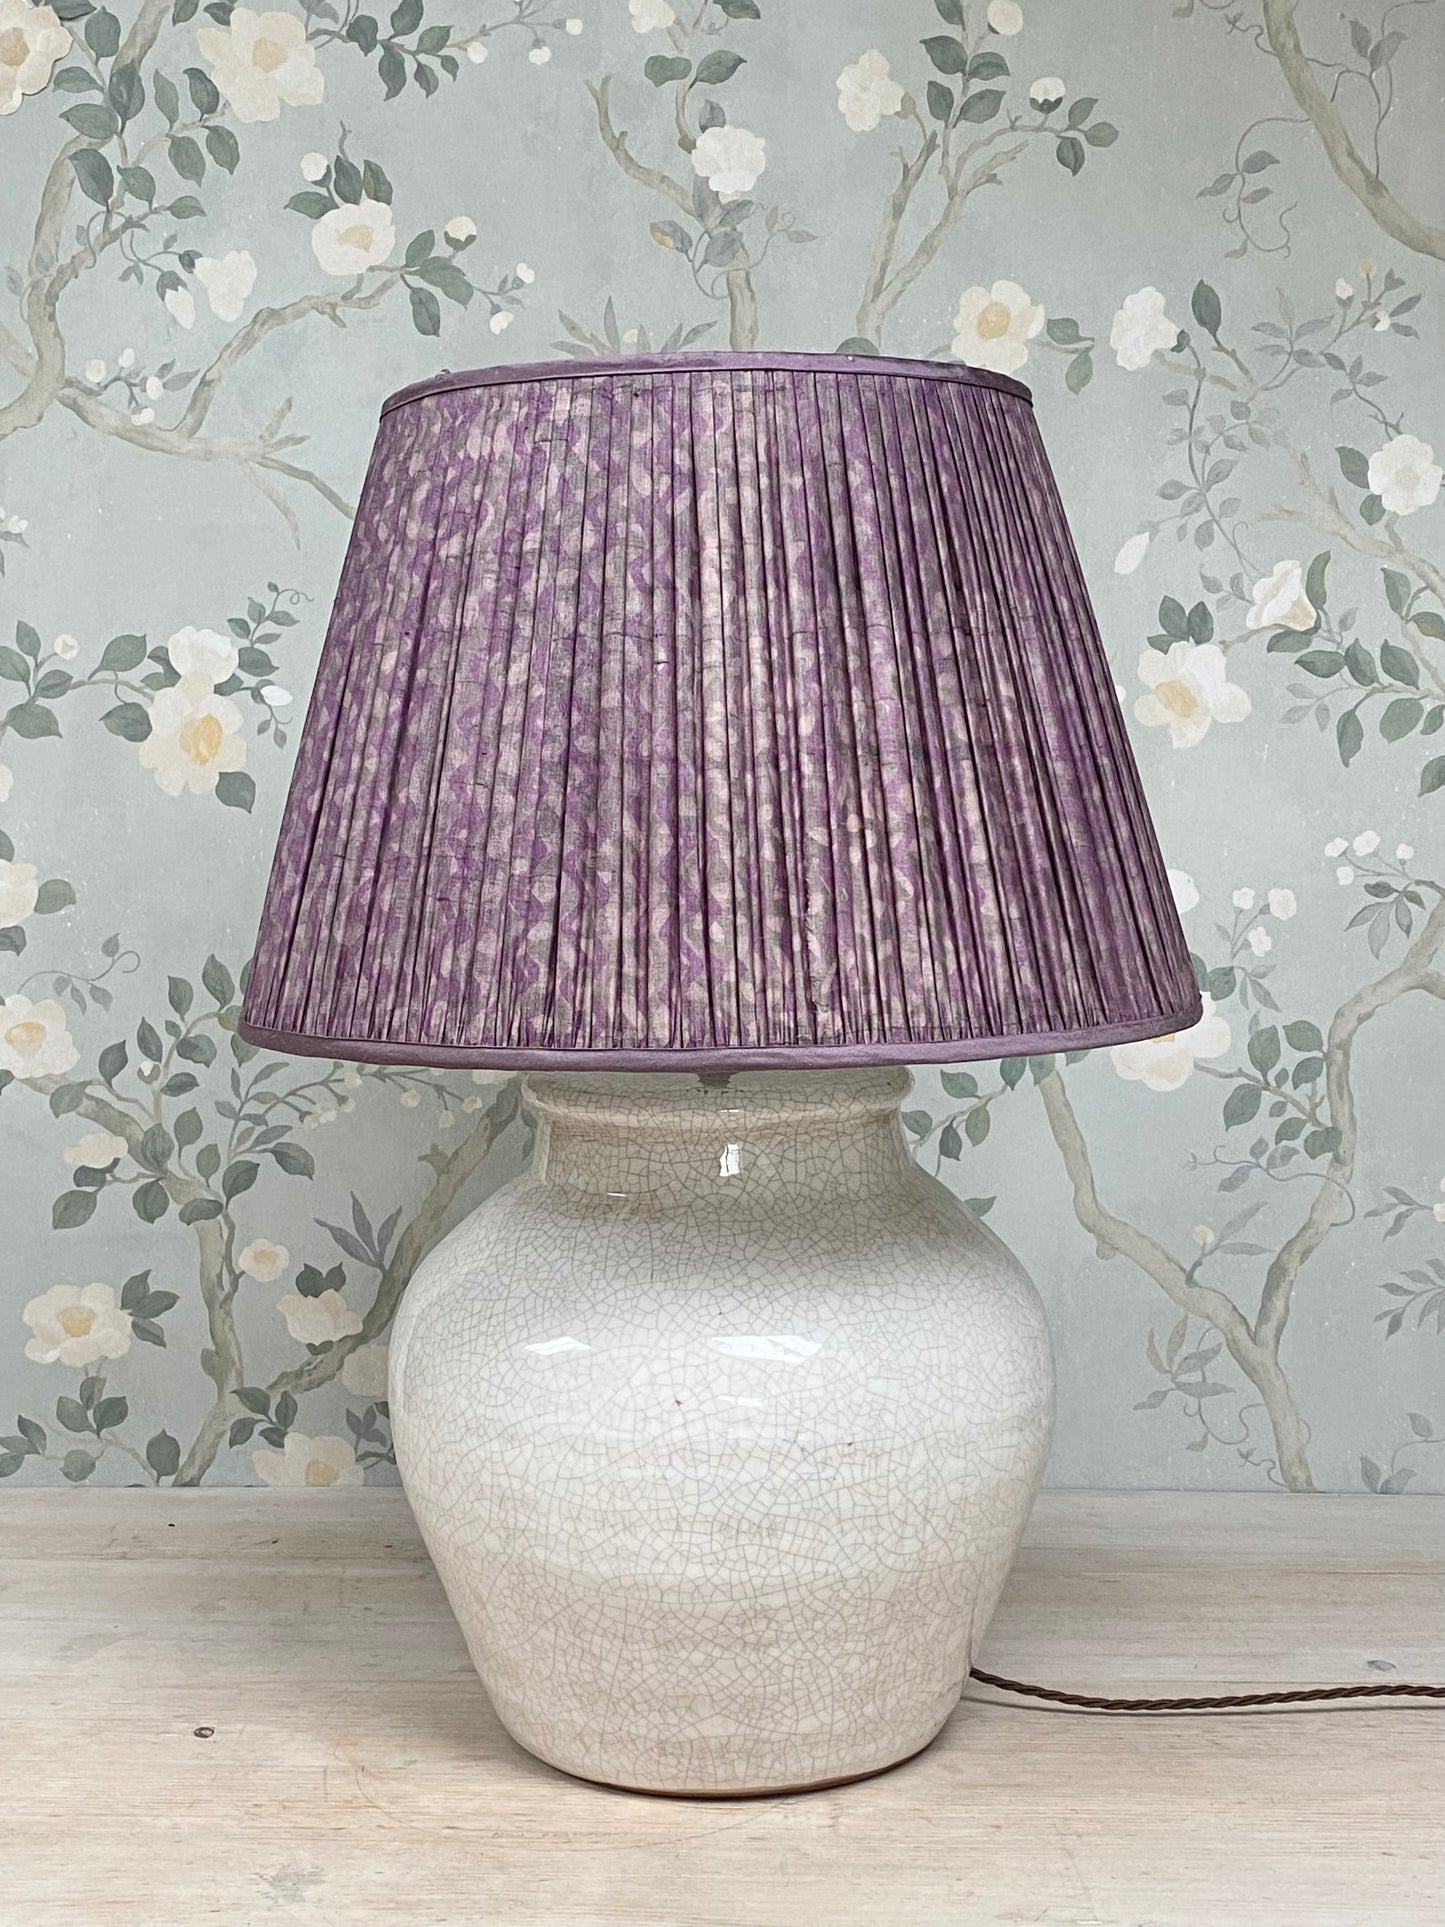 A pair of Amethyst Silk Lampshades from Penny Morrison